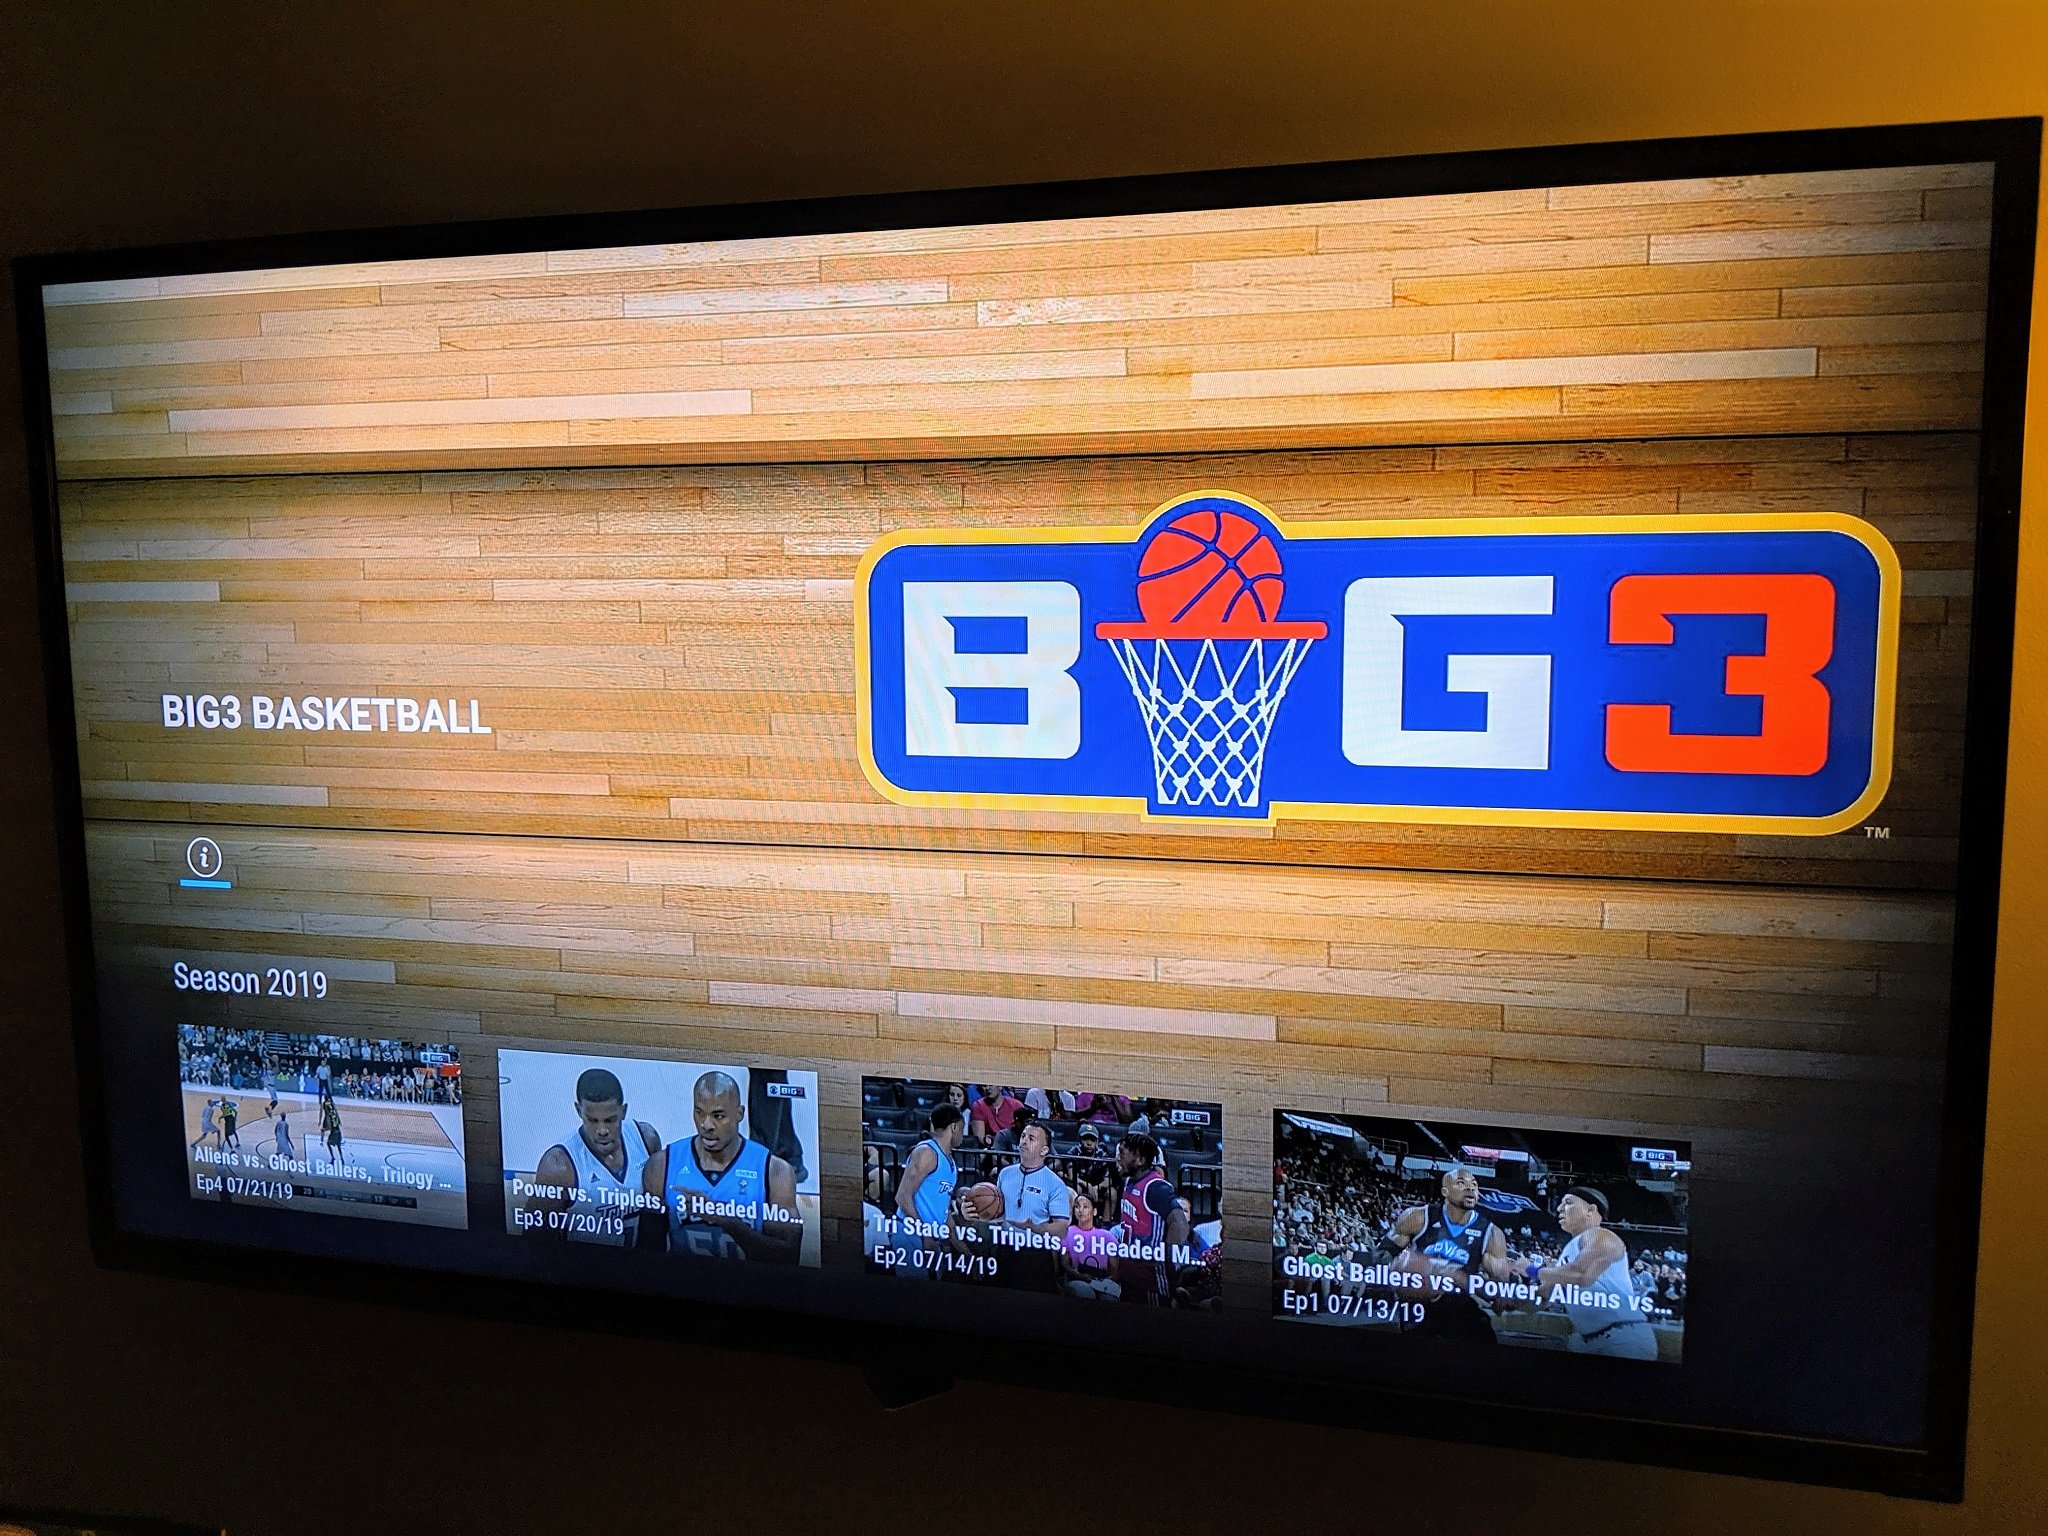 How to stream the Big 3 basketball league online What to Watch